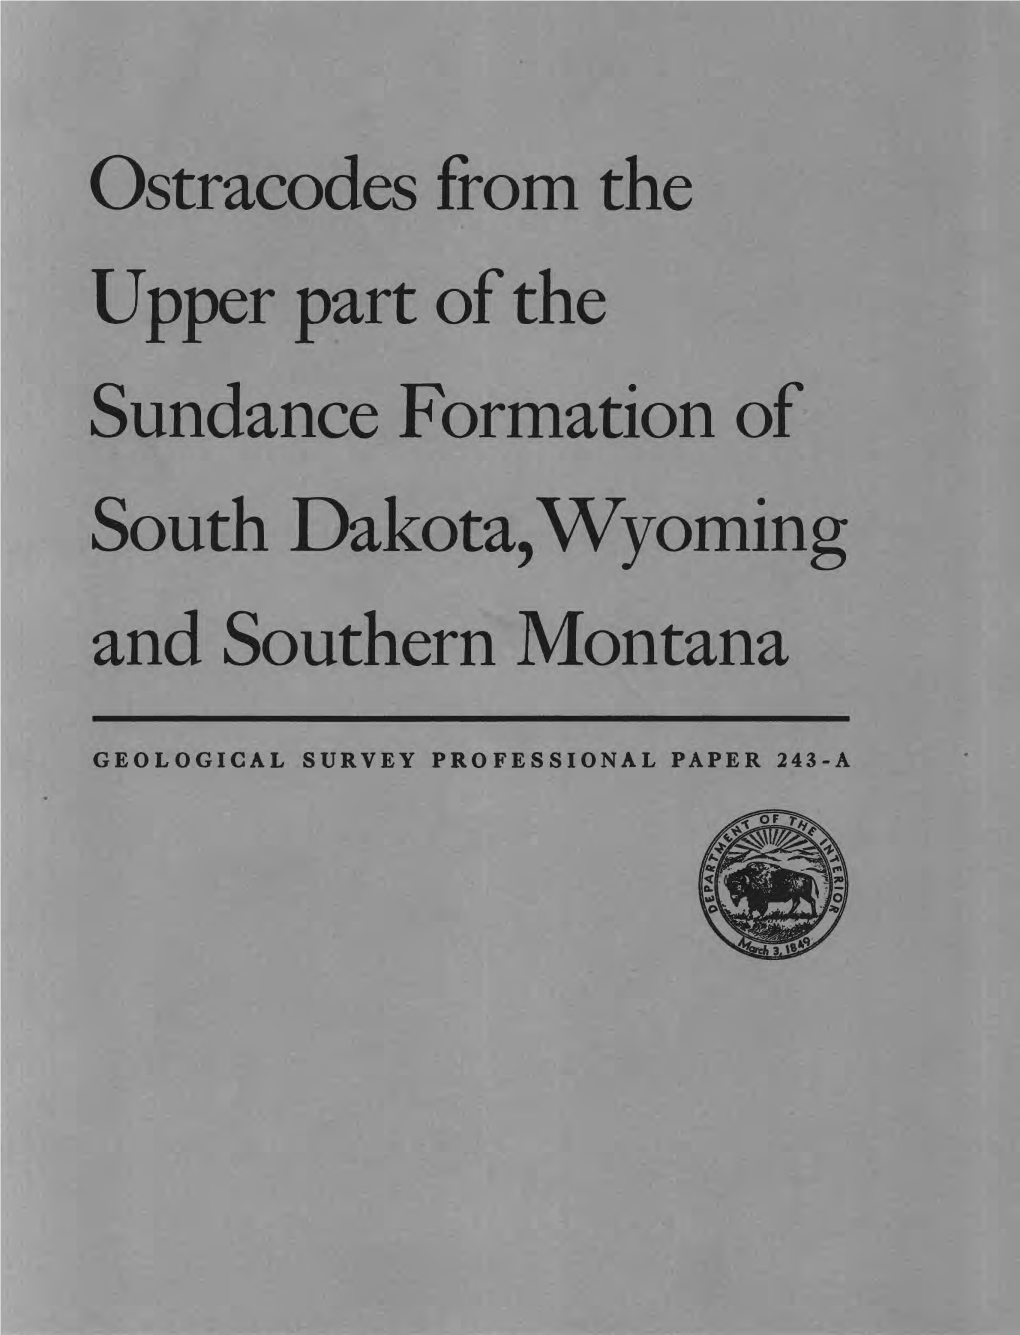 Ostracodes from the Upper Part of the Sundance Formation of South Dakota, Wyomin and Southern Montana